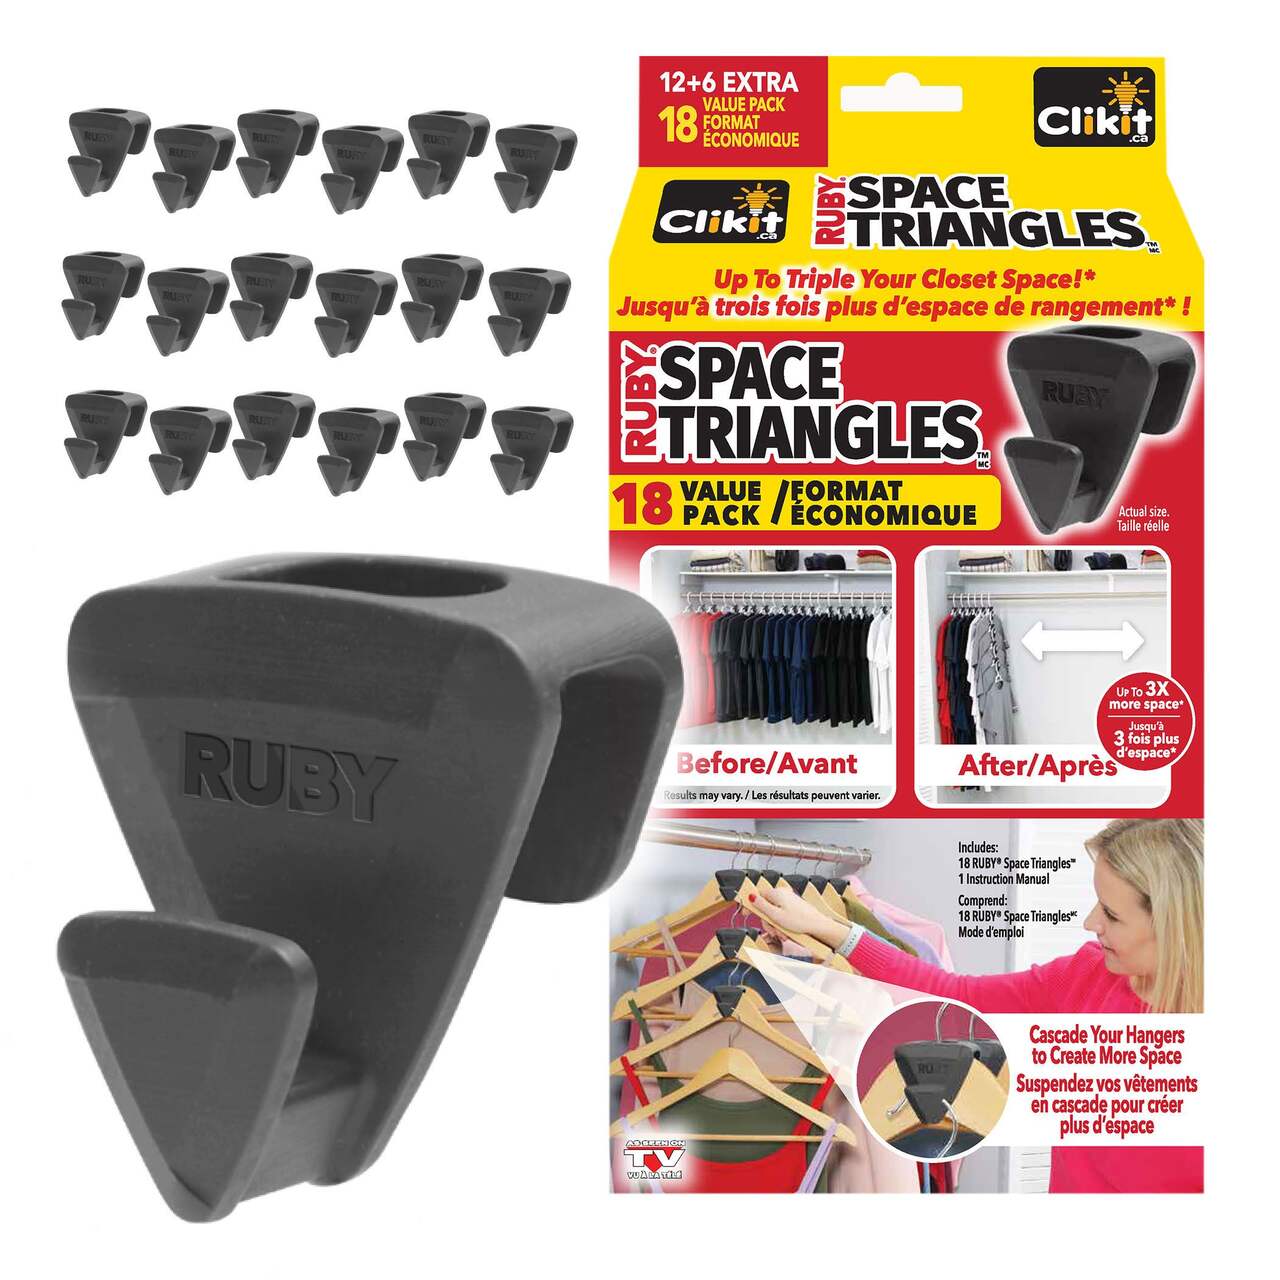 https://media-www.canadiantire.ca/product/living/as-seen-on-tv/asotv/4991420/ruby-space-triangles-be37e0ea-0c7c-4d9d-bf63-6f1b95aef5fd-jpgrendition.jpg?imdensity=1&imwidth=640&impolicy=mZoom